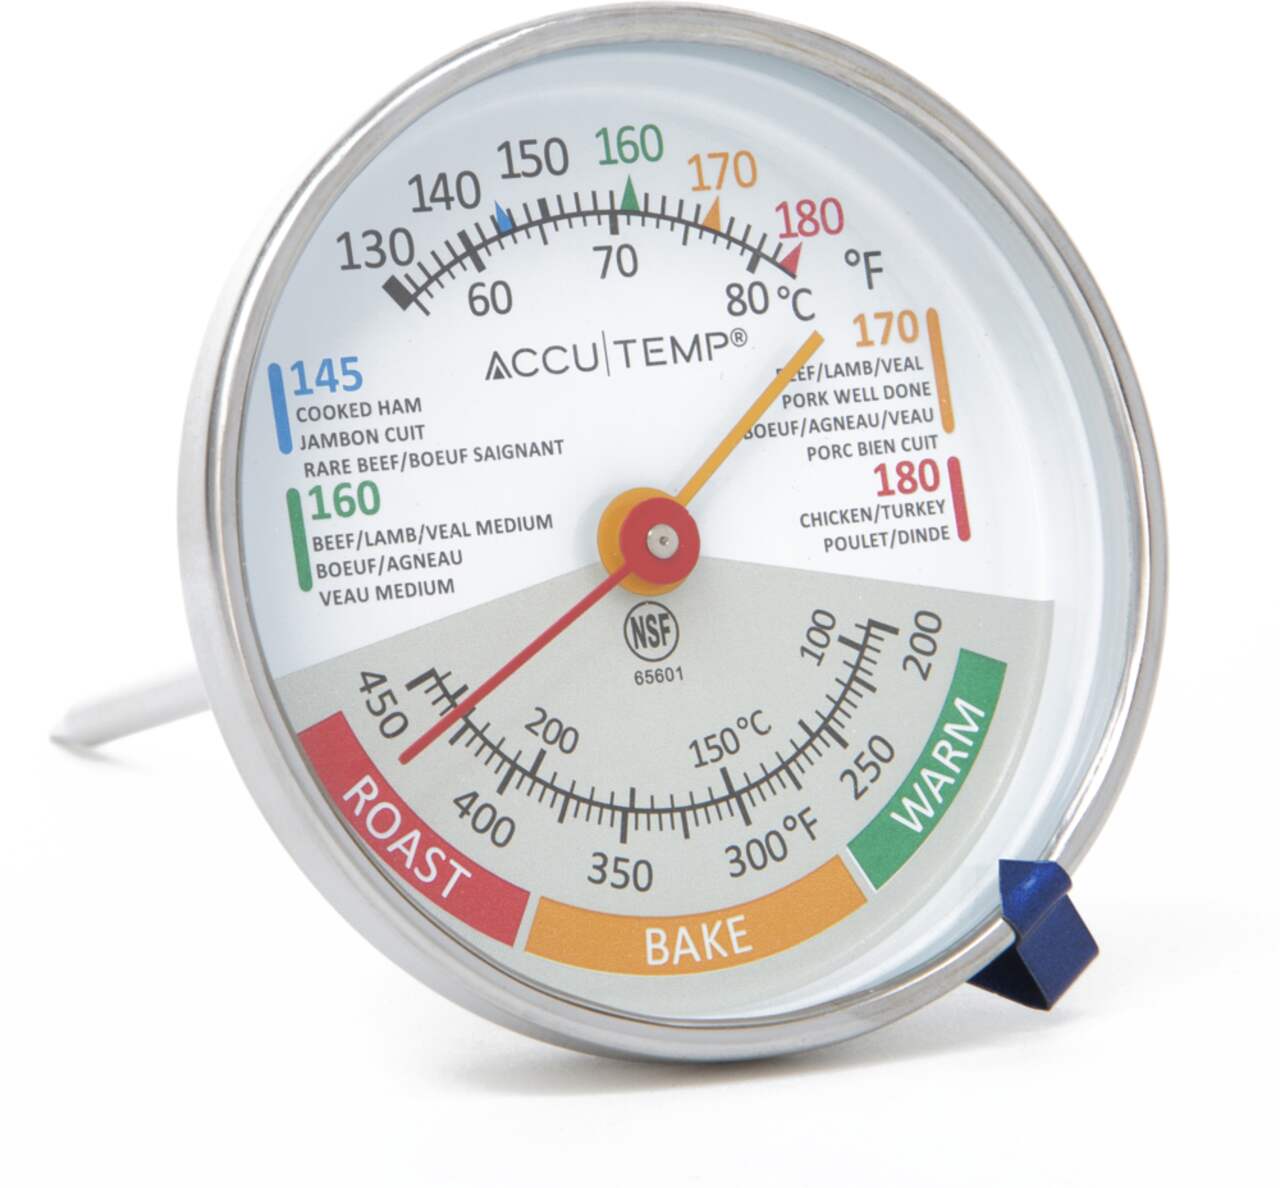 Oven Thermometer, Large Dial Cooking Thermometer, Pointer Type